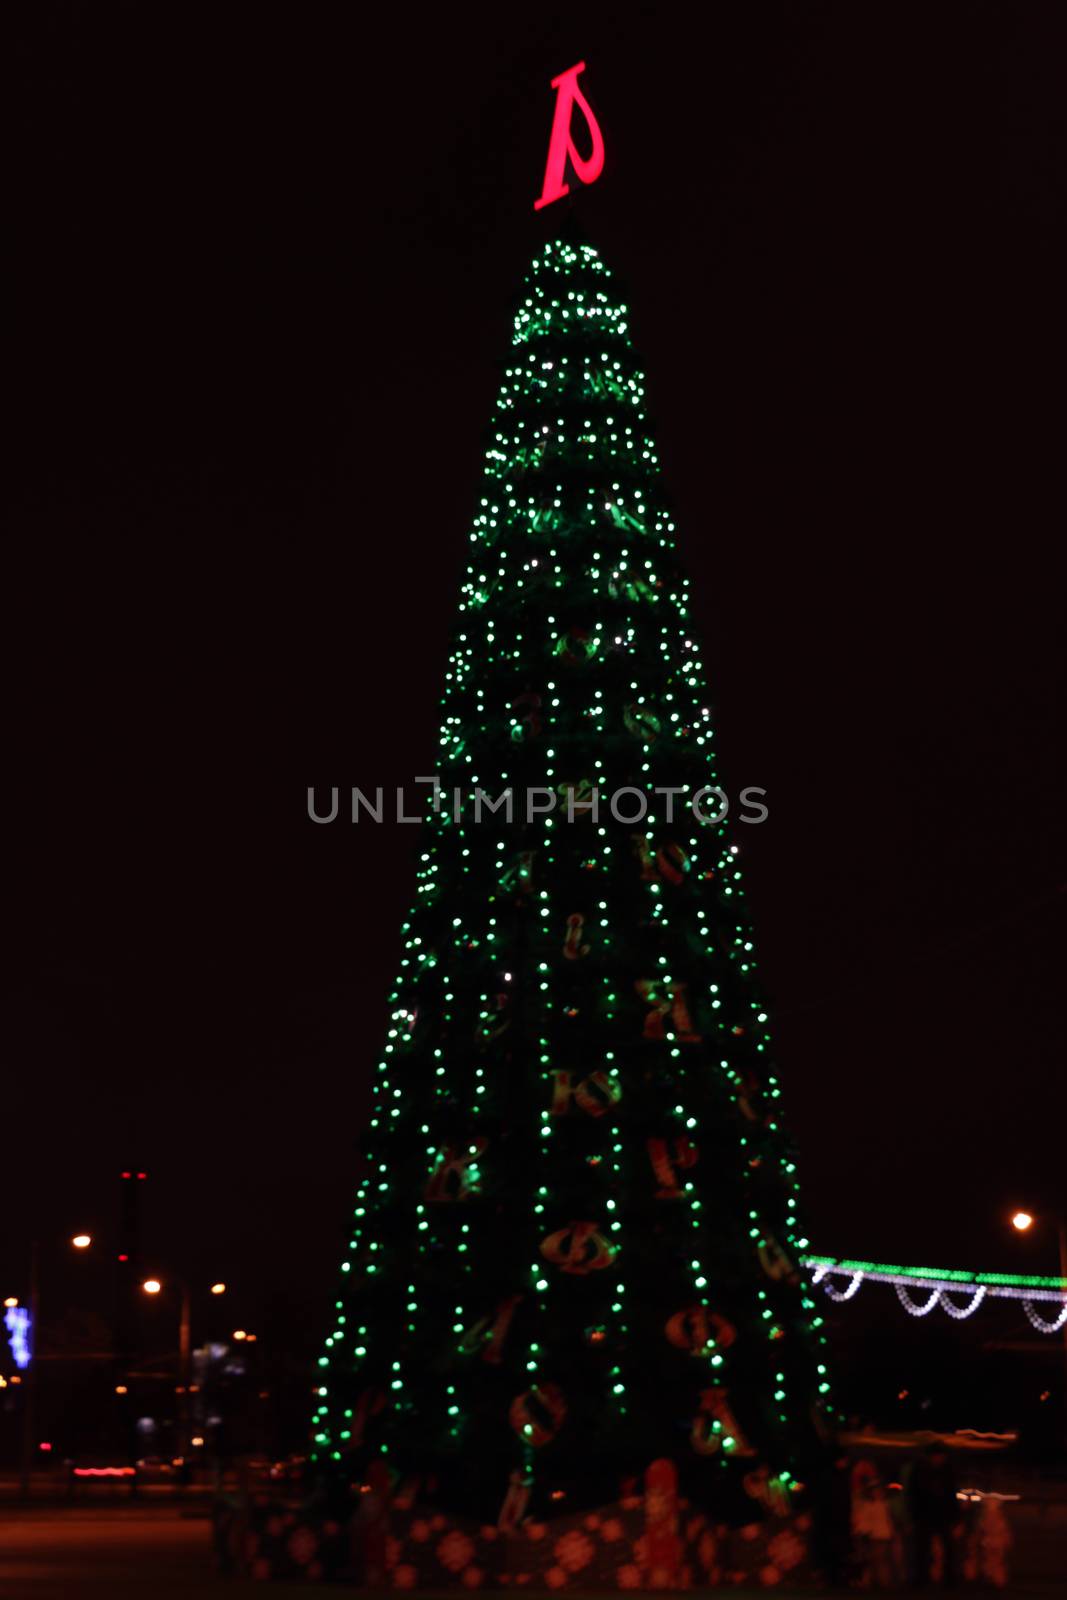 Snow Covered Christmas Tree with Multi Colored Lights at Night